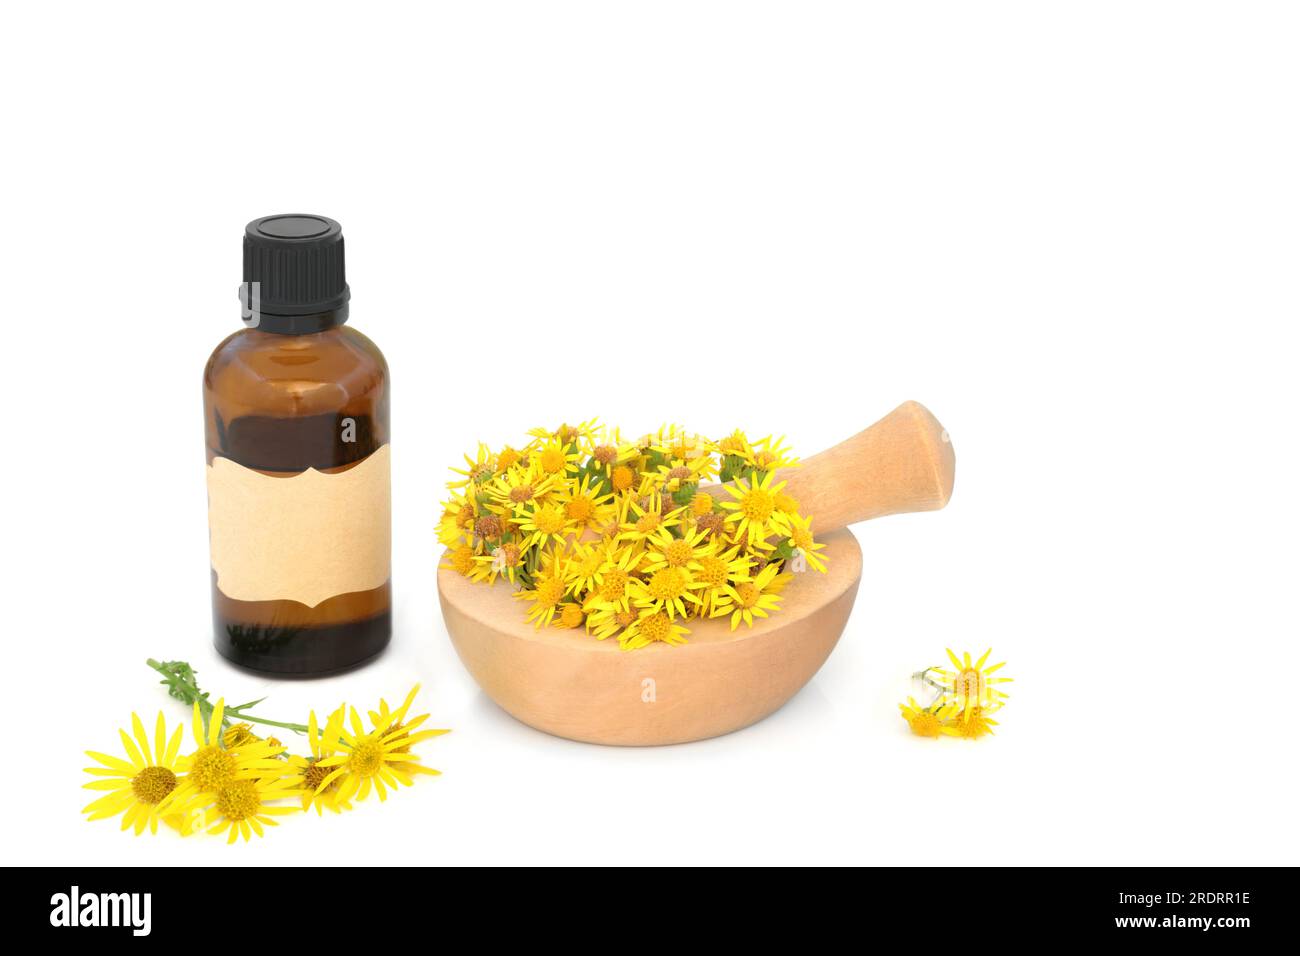 Ragwort flowers in a mortar on white with essence bottle. Used in herbal medicine to treat colic, rheumatism, painful periods, menopause symptoms. Stock Photo